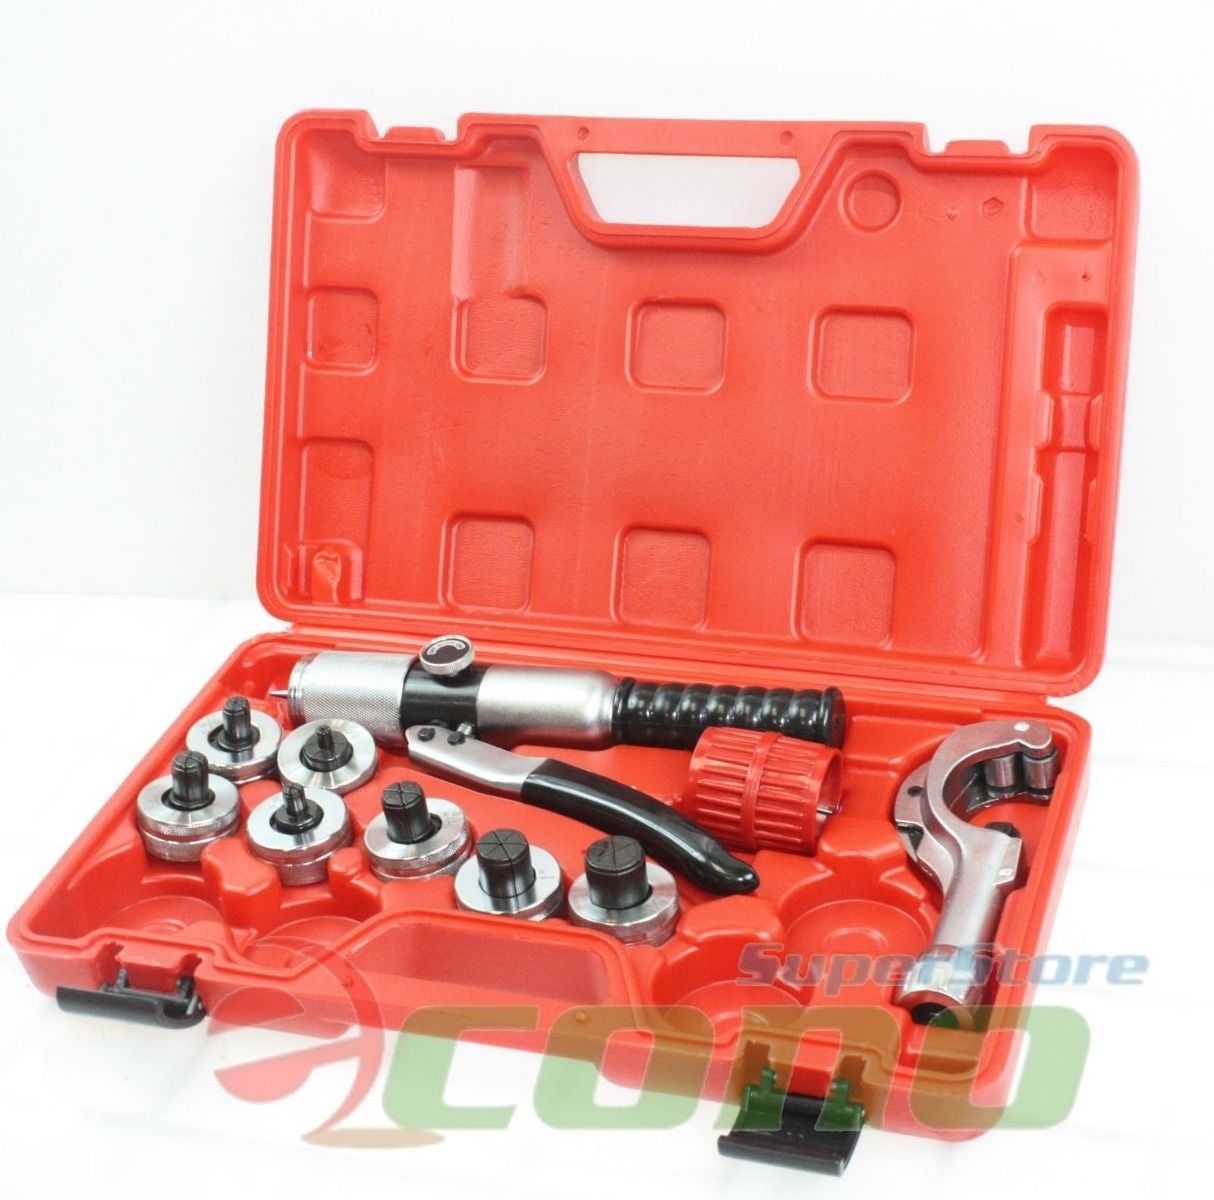 CT-100A Hydraulic Tube Expander 7 Lever Swaging Plumbing Kit HVAC Tool Pipe 